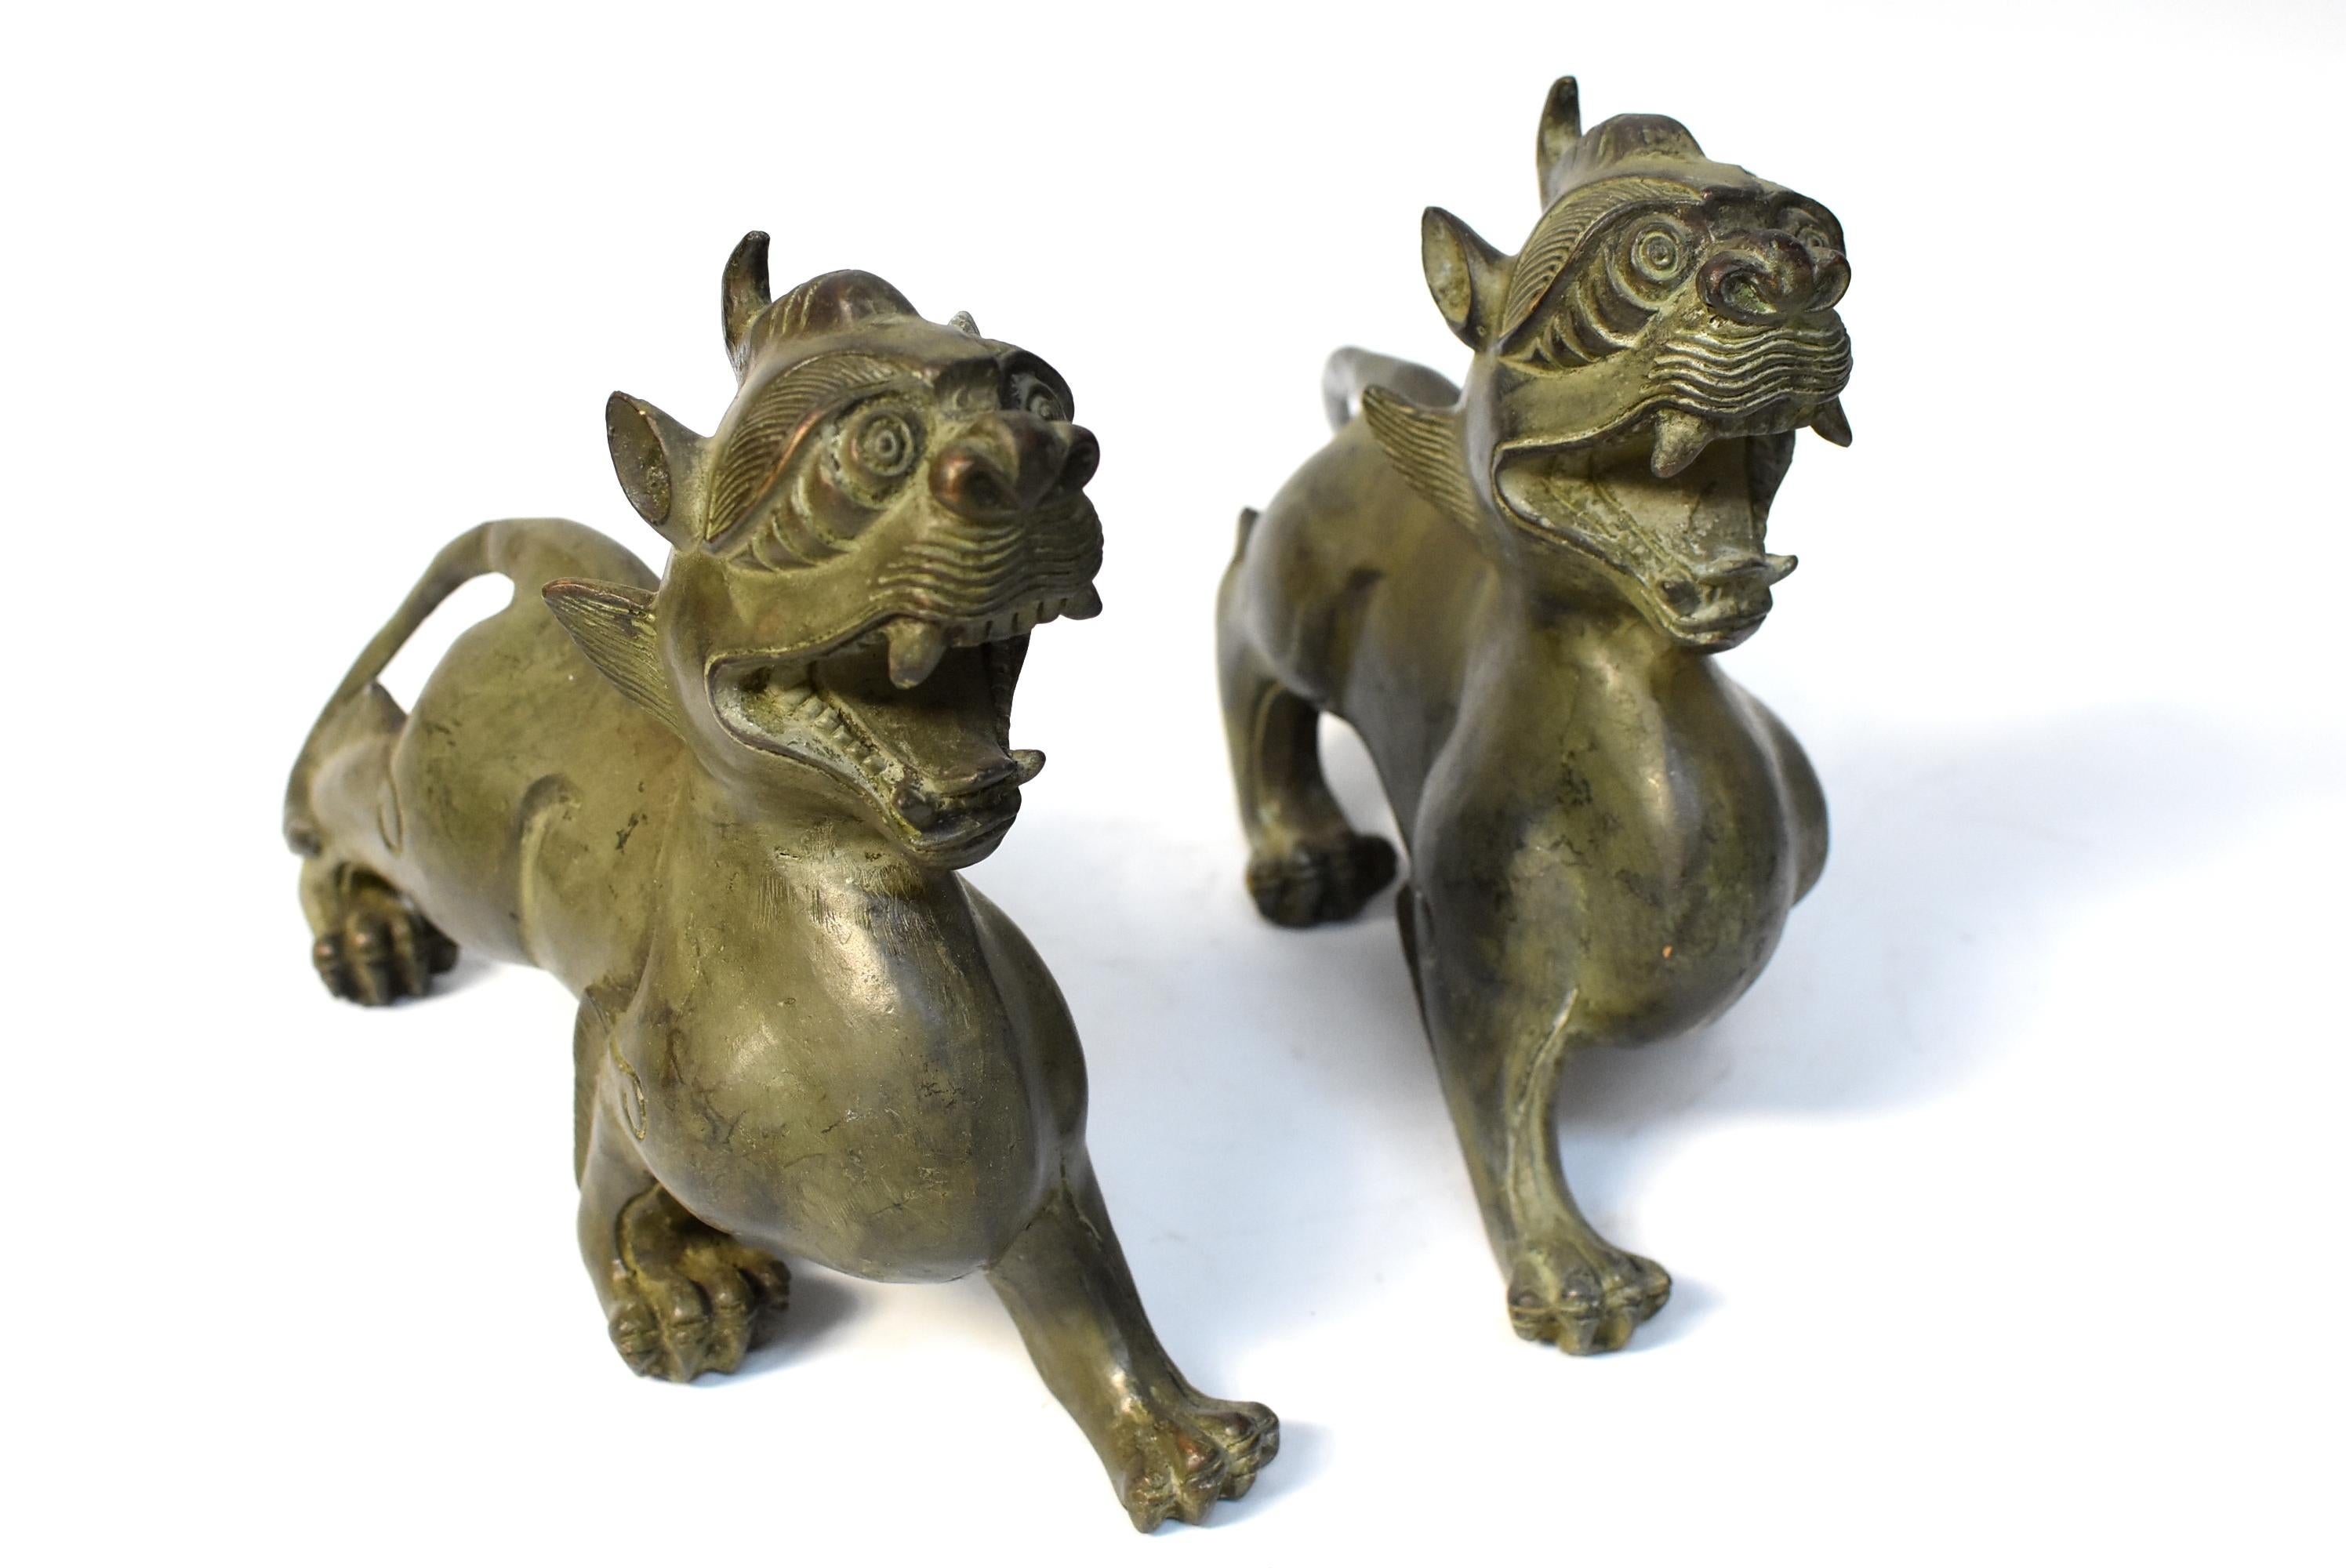 Pair of beautiful, large bronze Pi Xiu. The Pi Xiu is a mythical animal that is believed to safe guard and keep wealth. These statues are substantial and finely crafted. Masculine bodies, strong paws and tails, vivacious expressions.